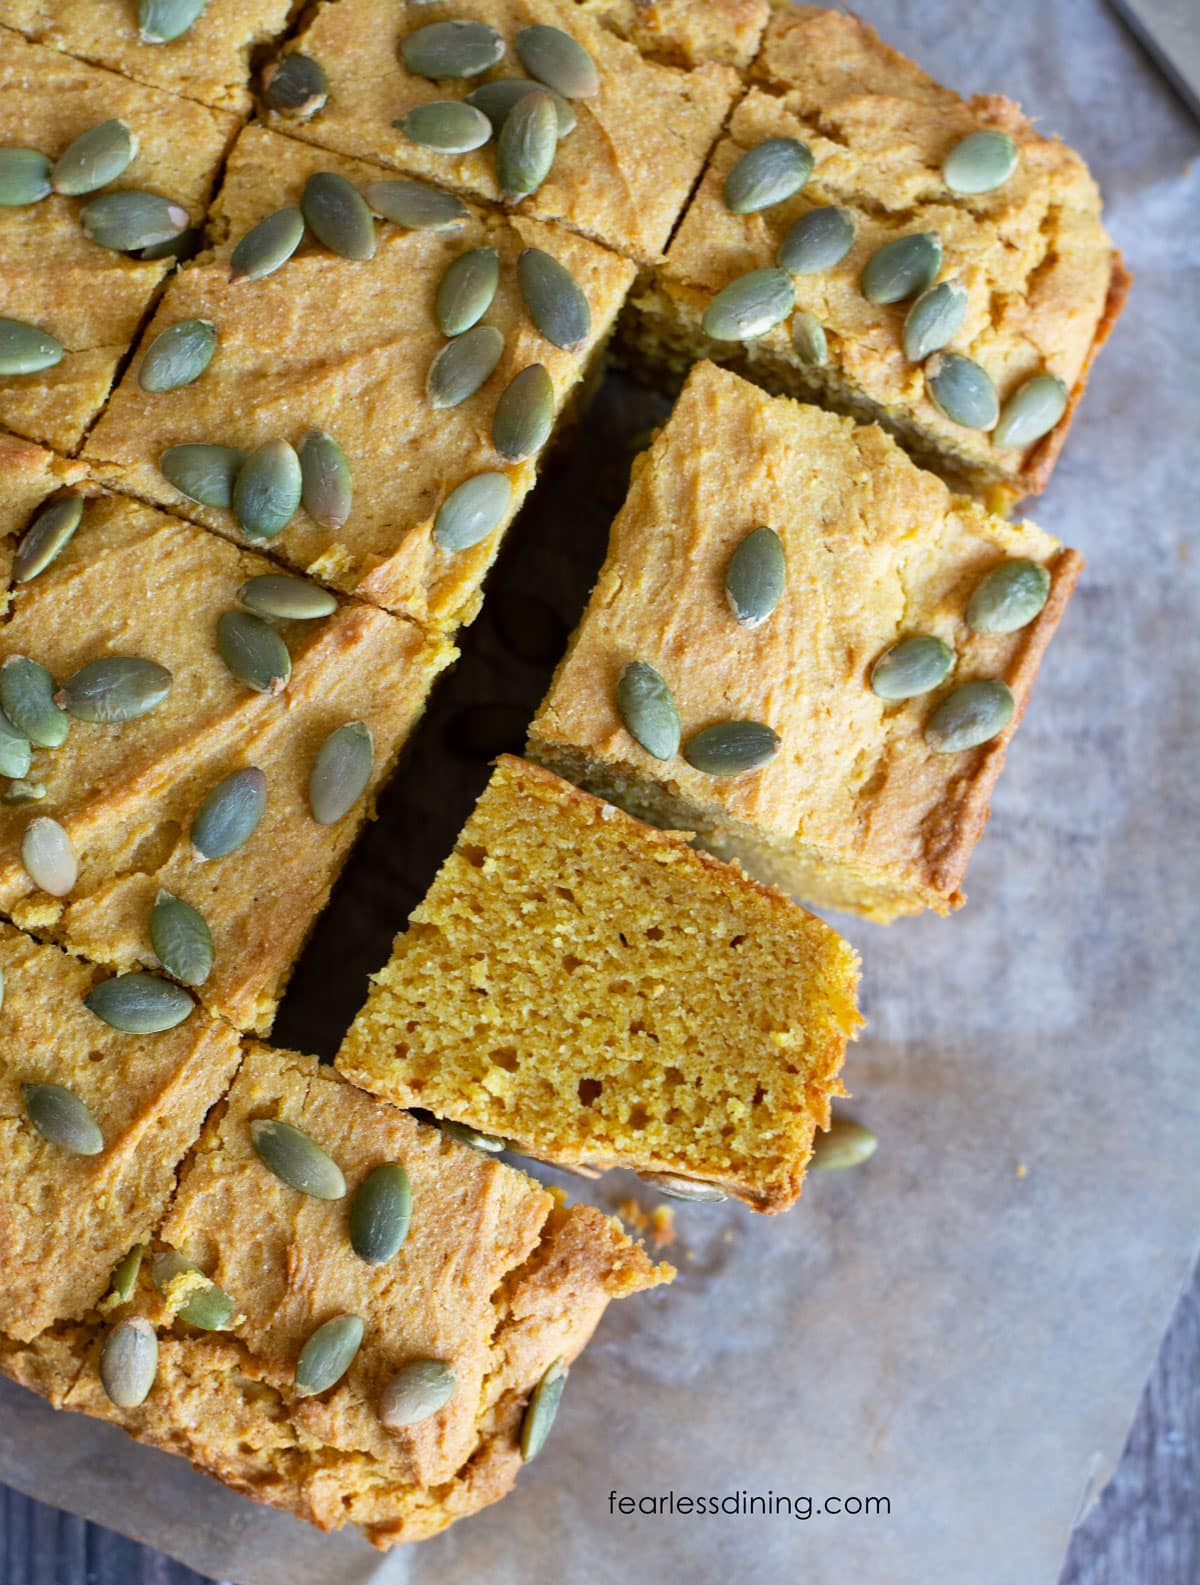 Baked, sliced gluten free pumpkin cornbread. One piece is on its side so you can see the inside.